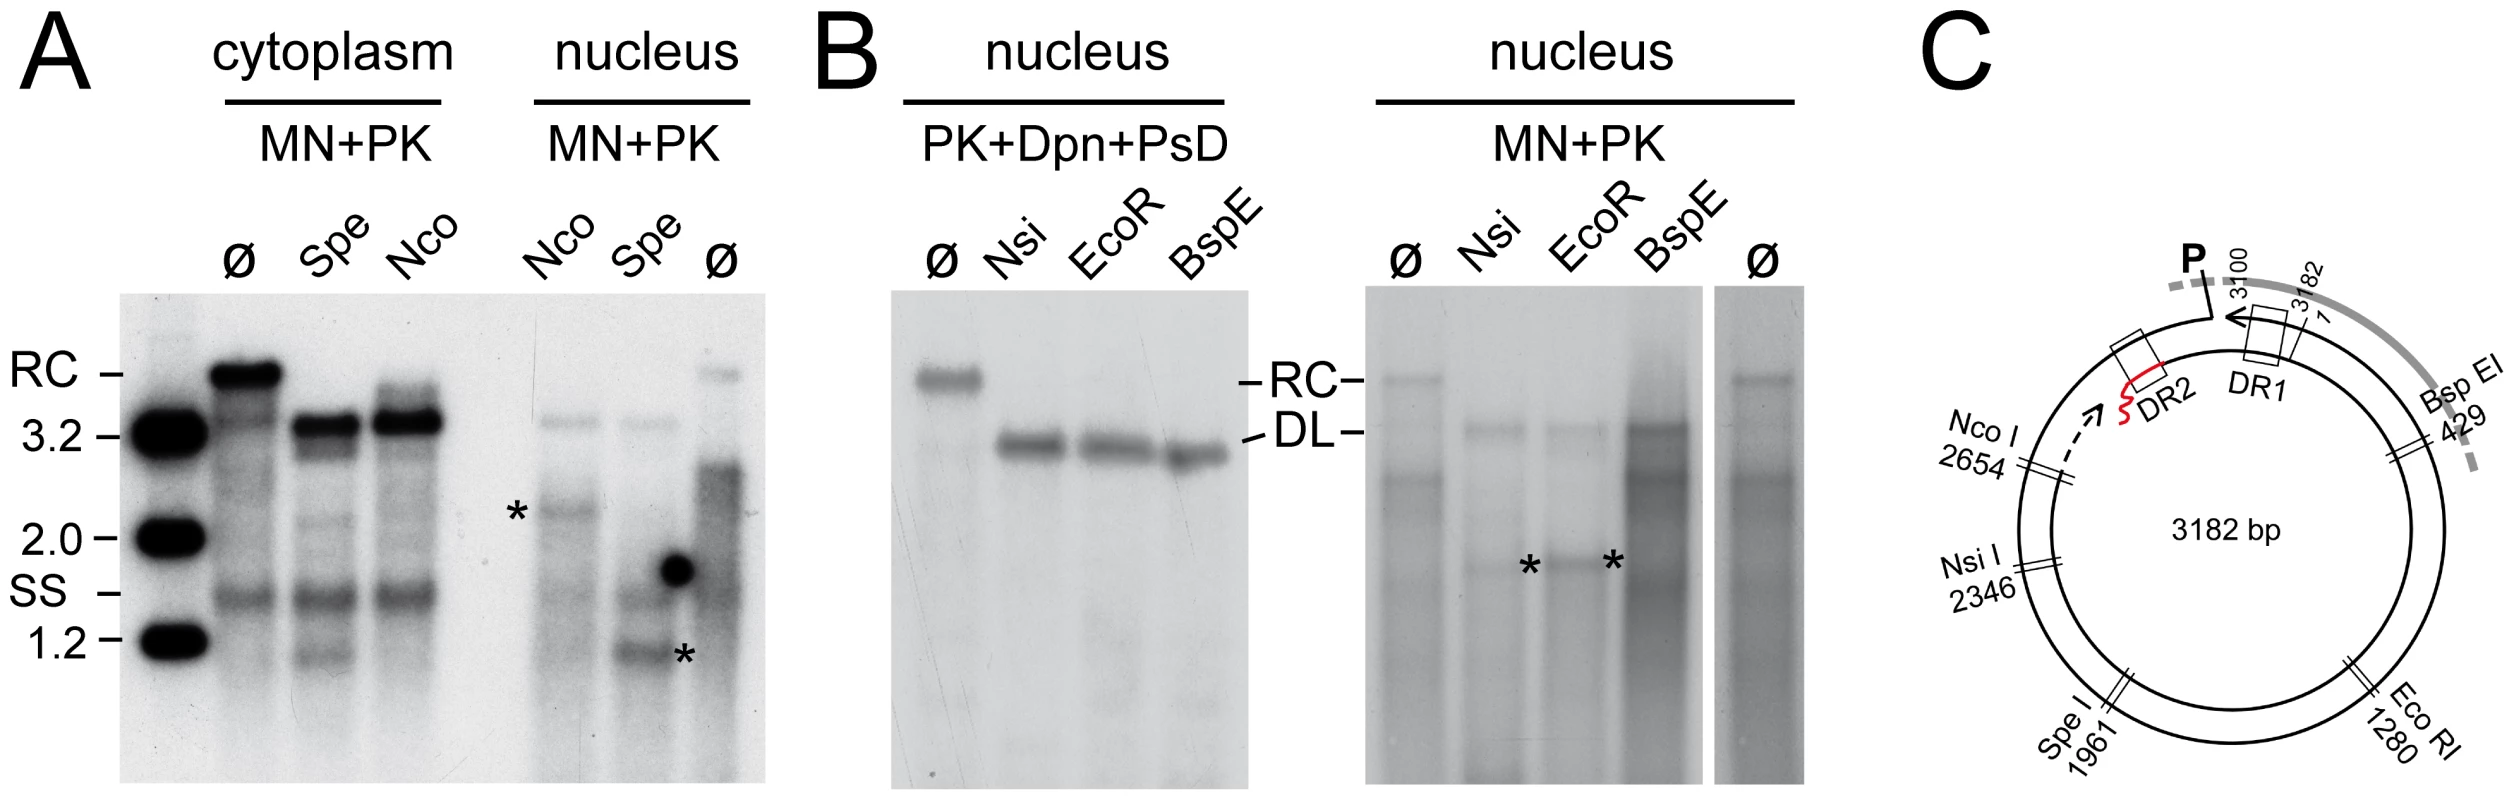 Restriction mapping of nuclear HBV rcDNA suggests genome region-selective MN accessibility.